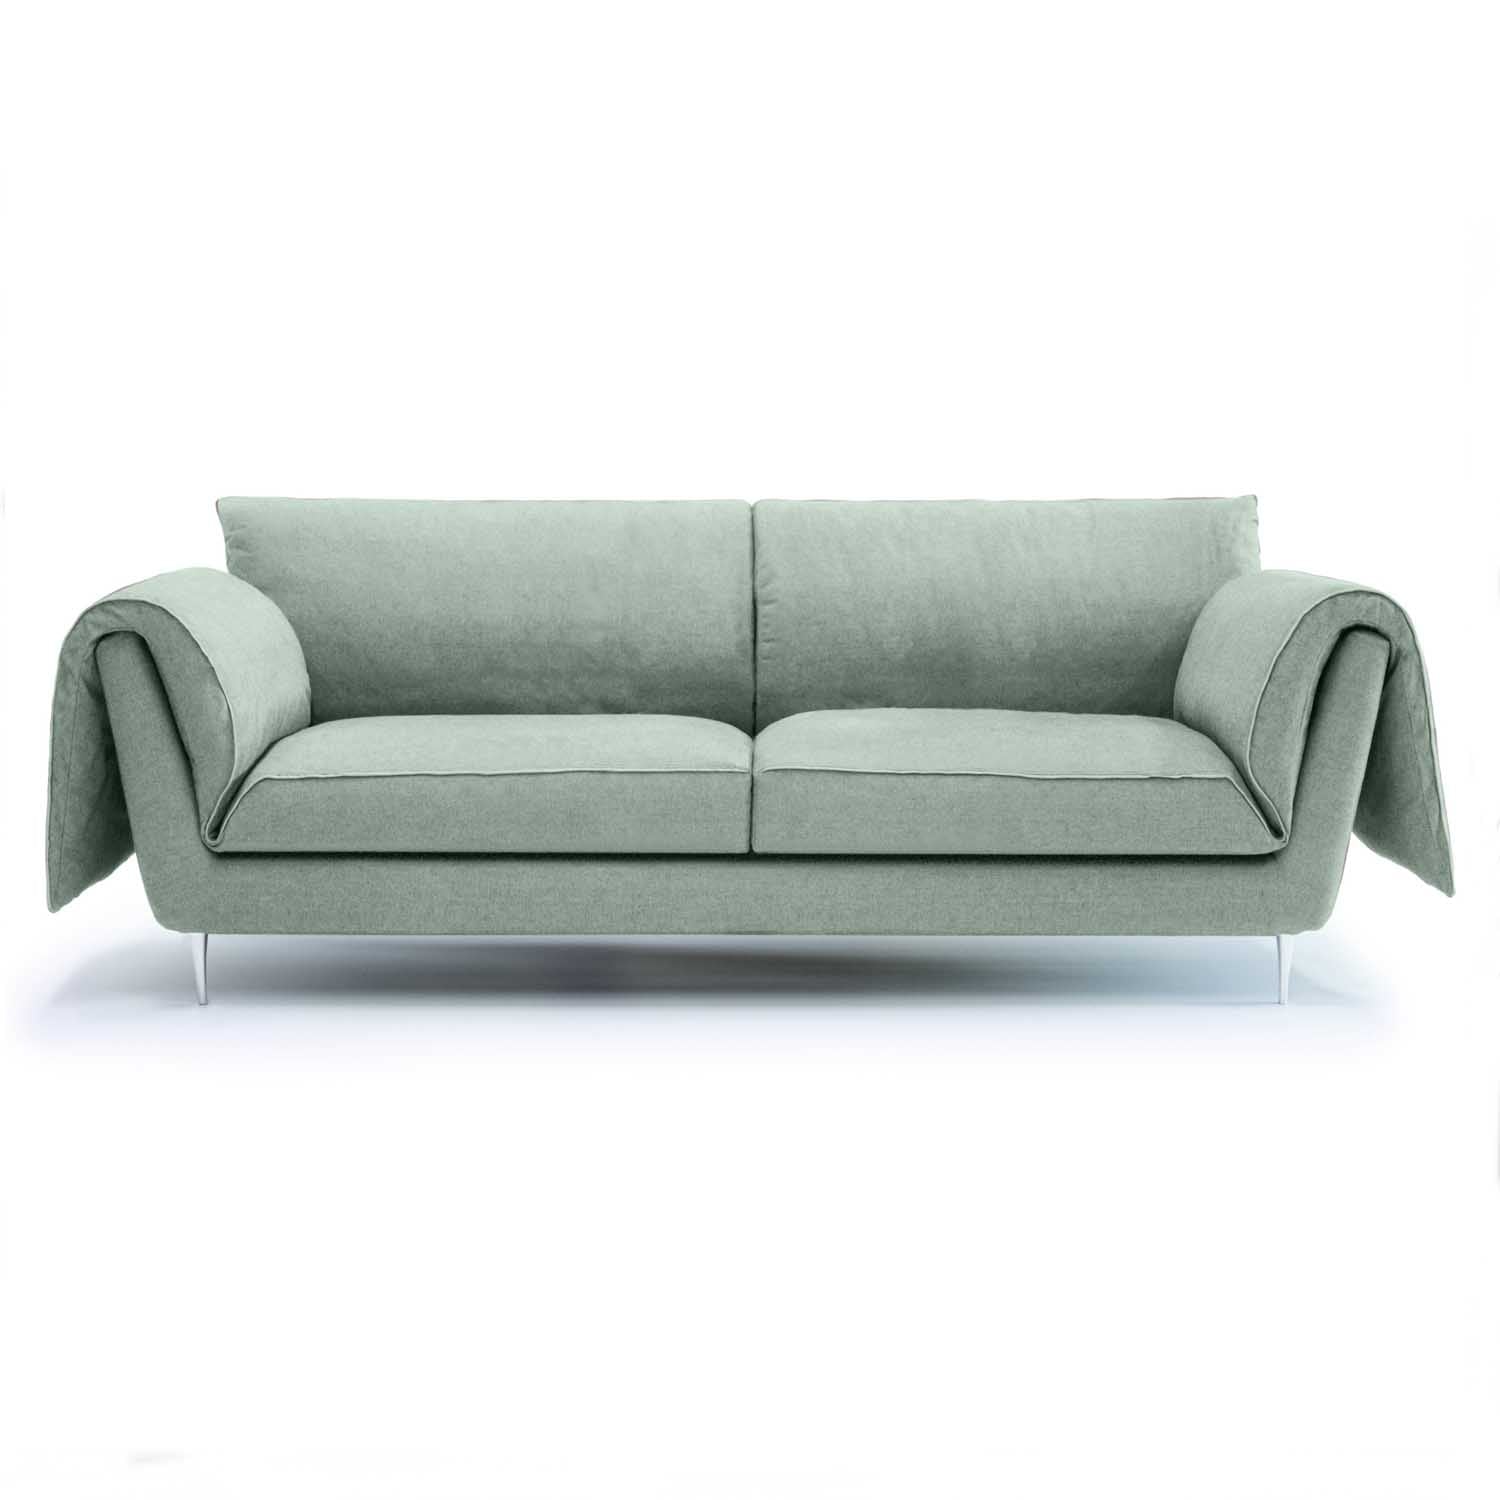 Celebrate sustainable living with Casquet. pastel linen sofa.